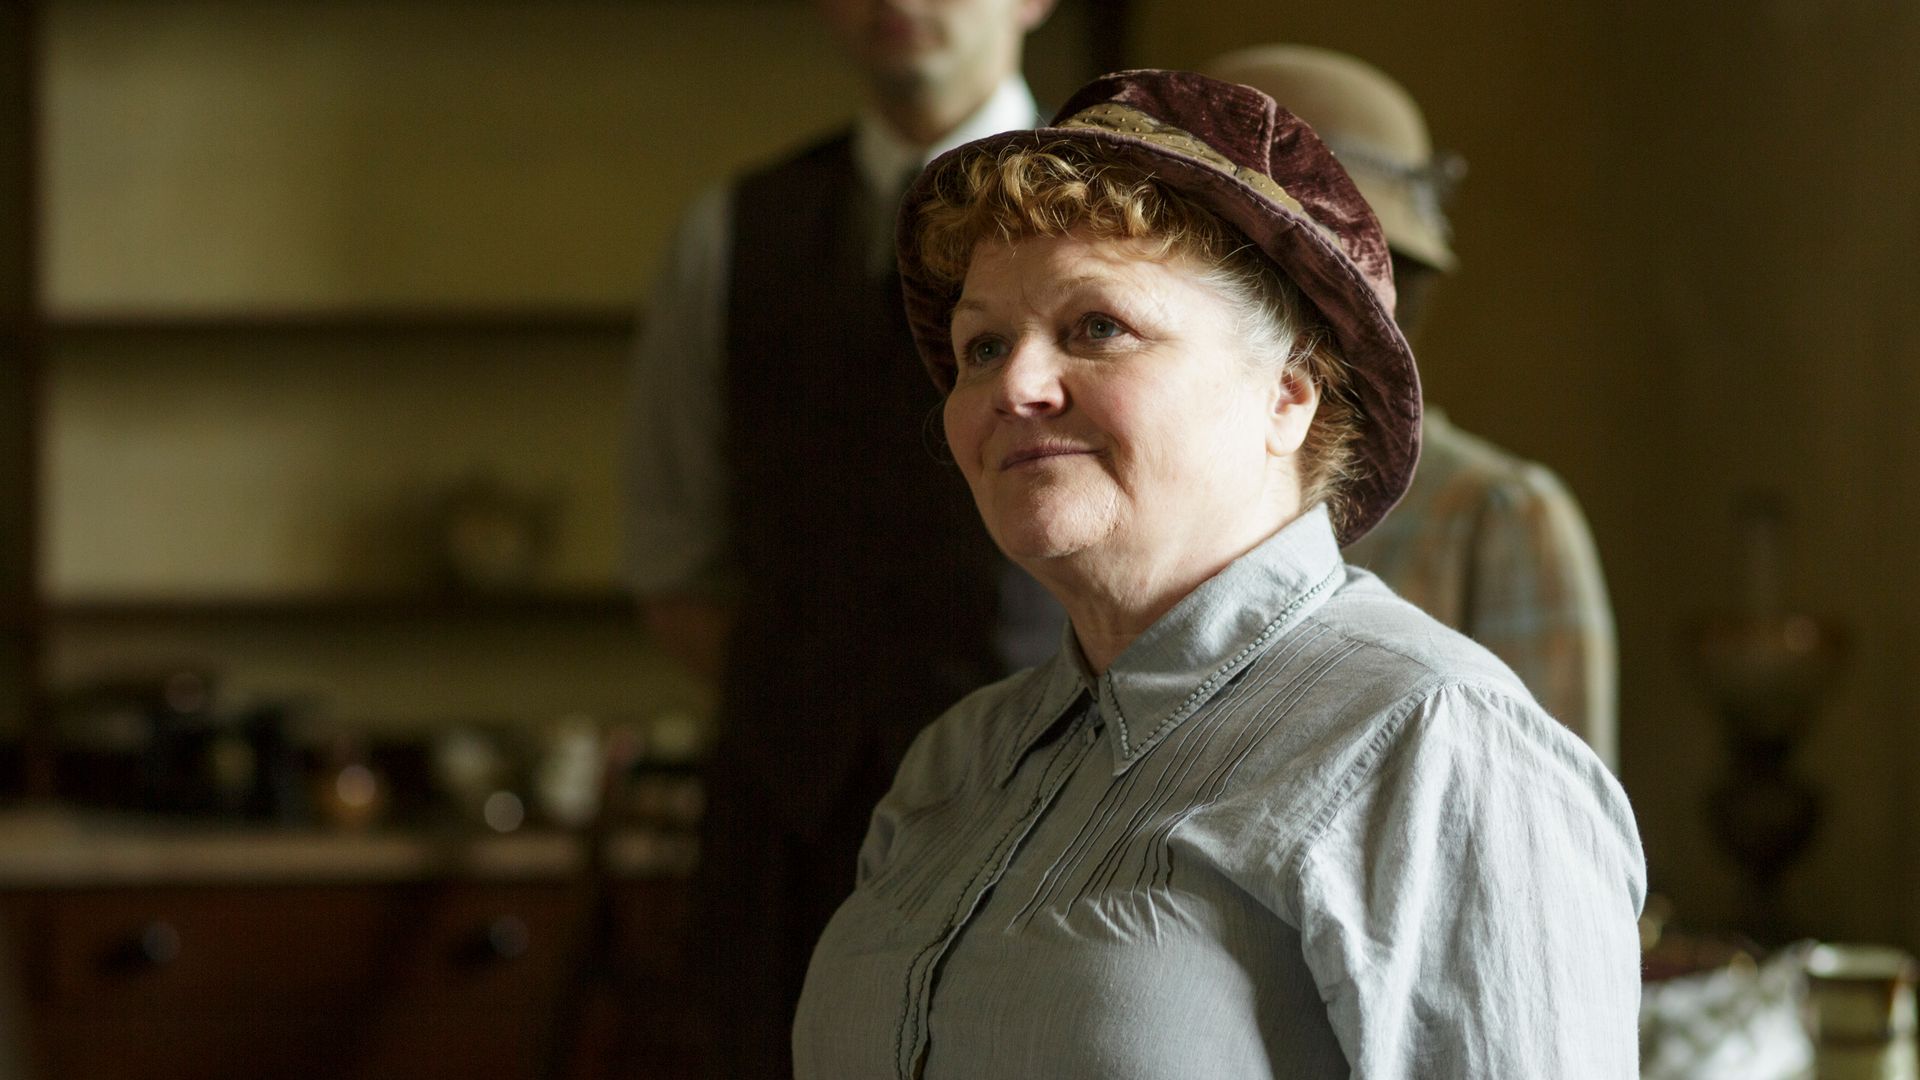 Lesley Nicol as Mrs Patmore in Downton Abbey